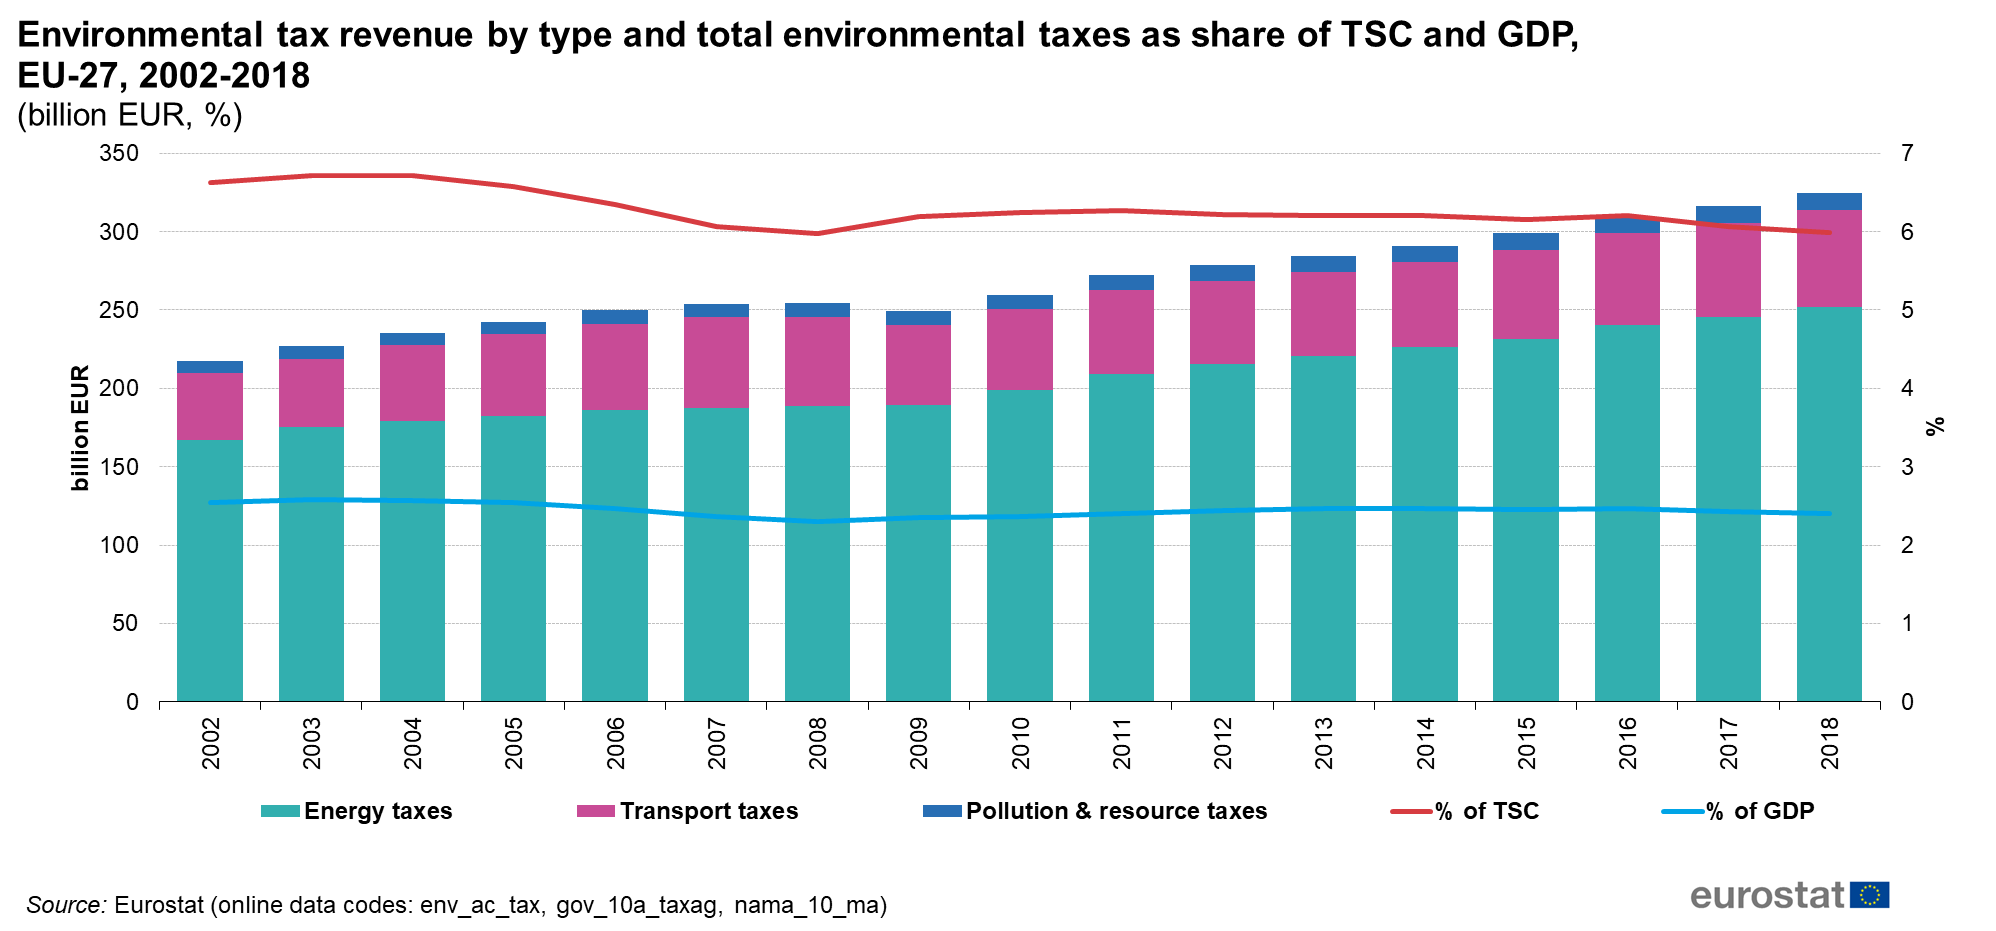 Chart showing environmental tax revenbues by type and environmental taxes as a share of gross domestic product and Taxes and Social Contribution raised in the EU 27 from 2002 to 2018. Environmental tax revenues have steadily increases over time but have remained stable as a share of GDP and taxes and social contribution.